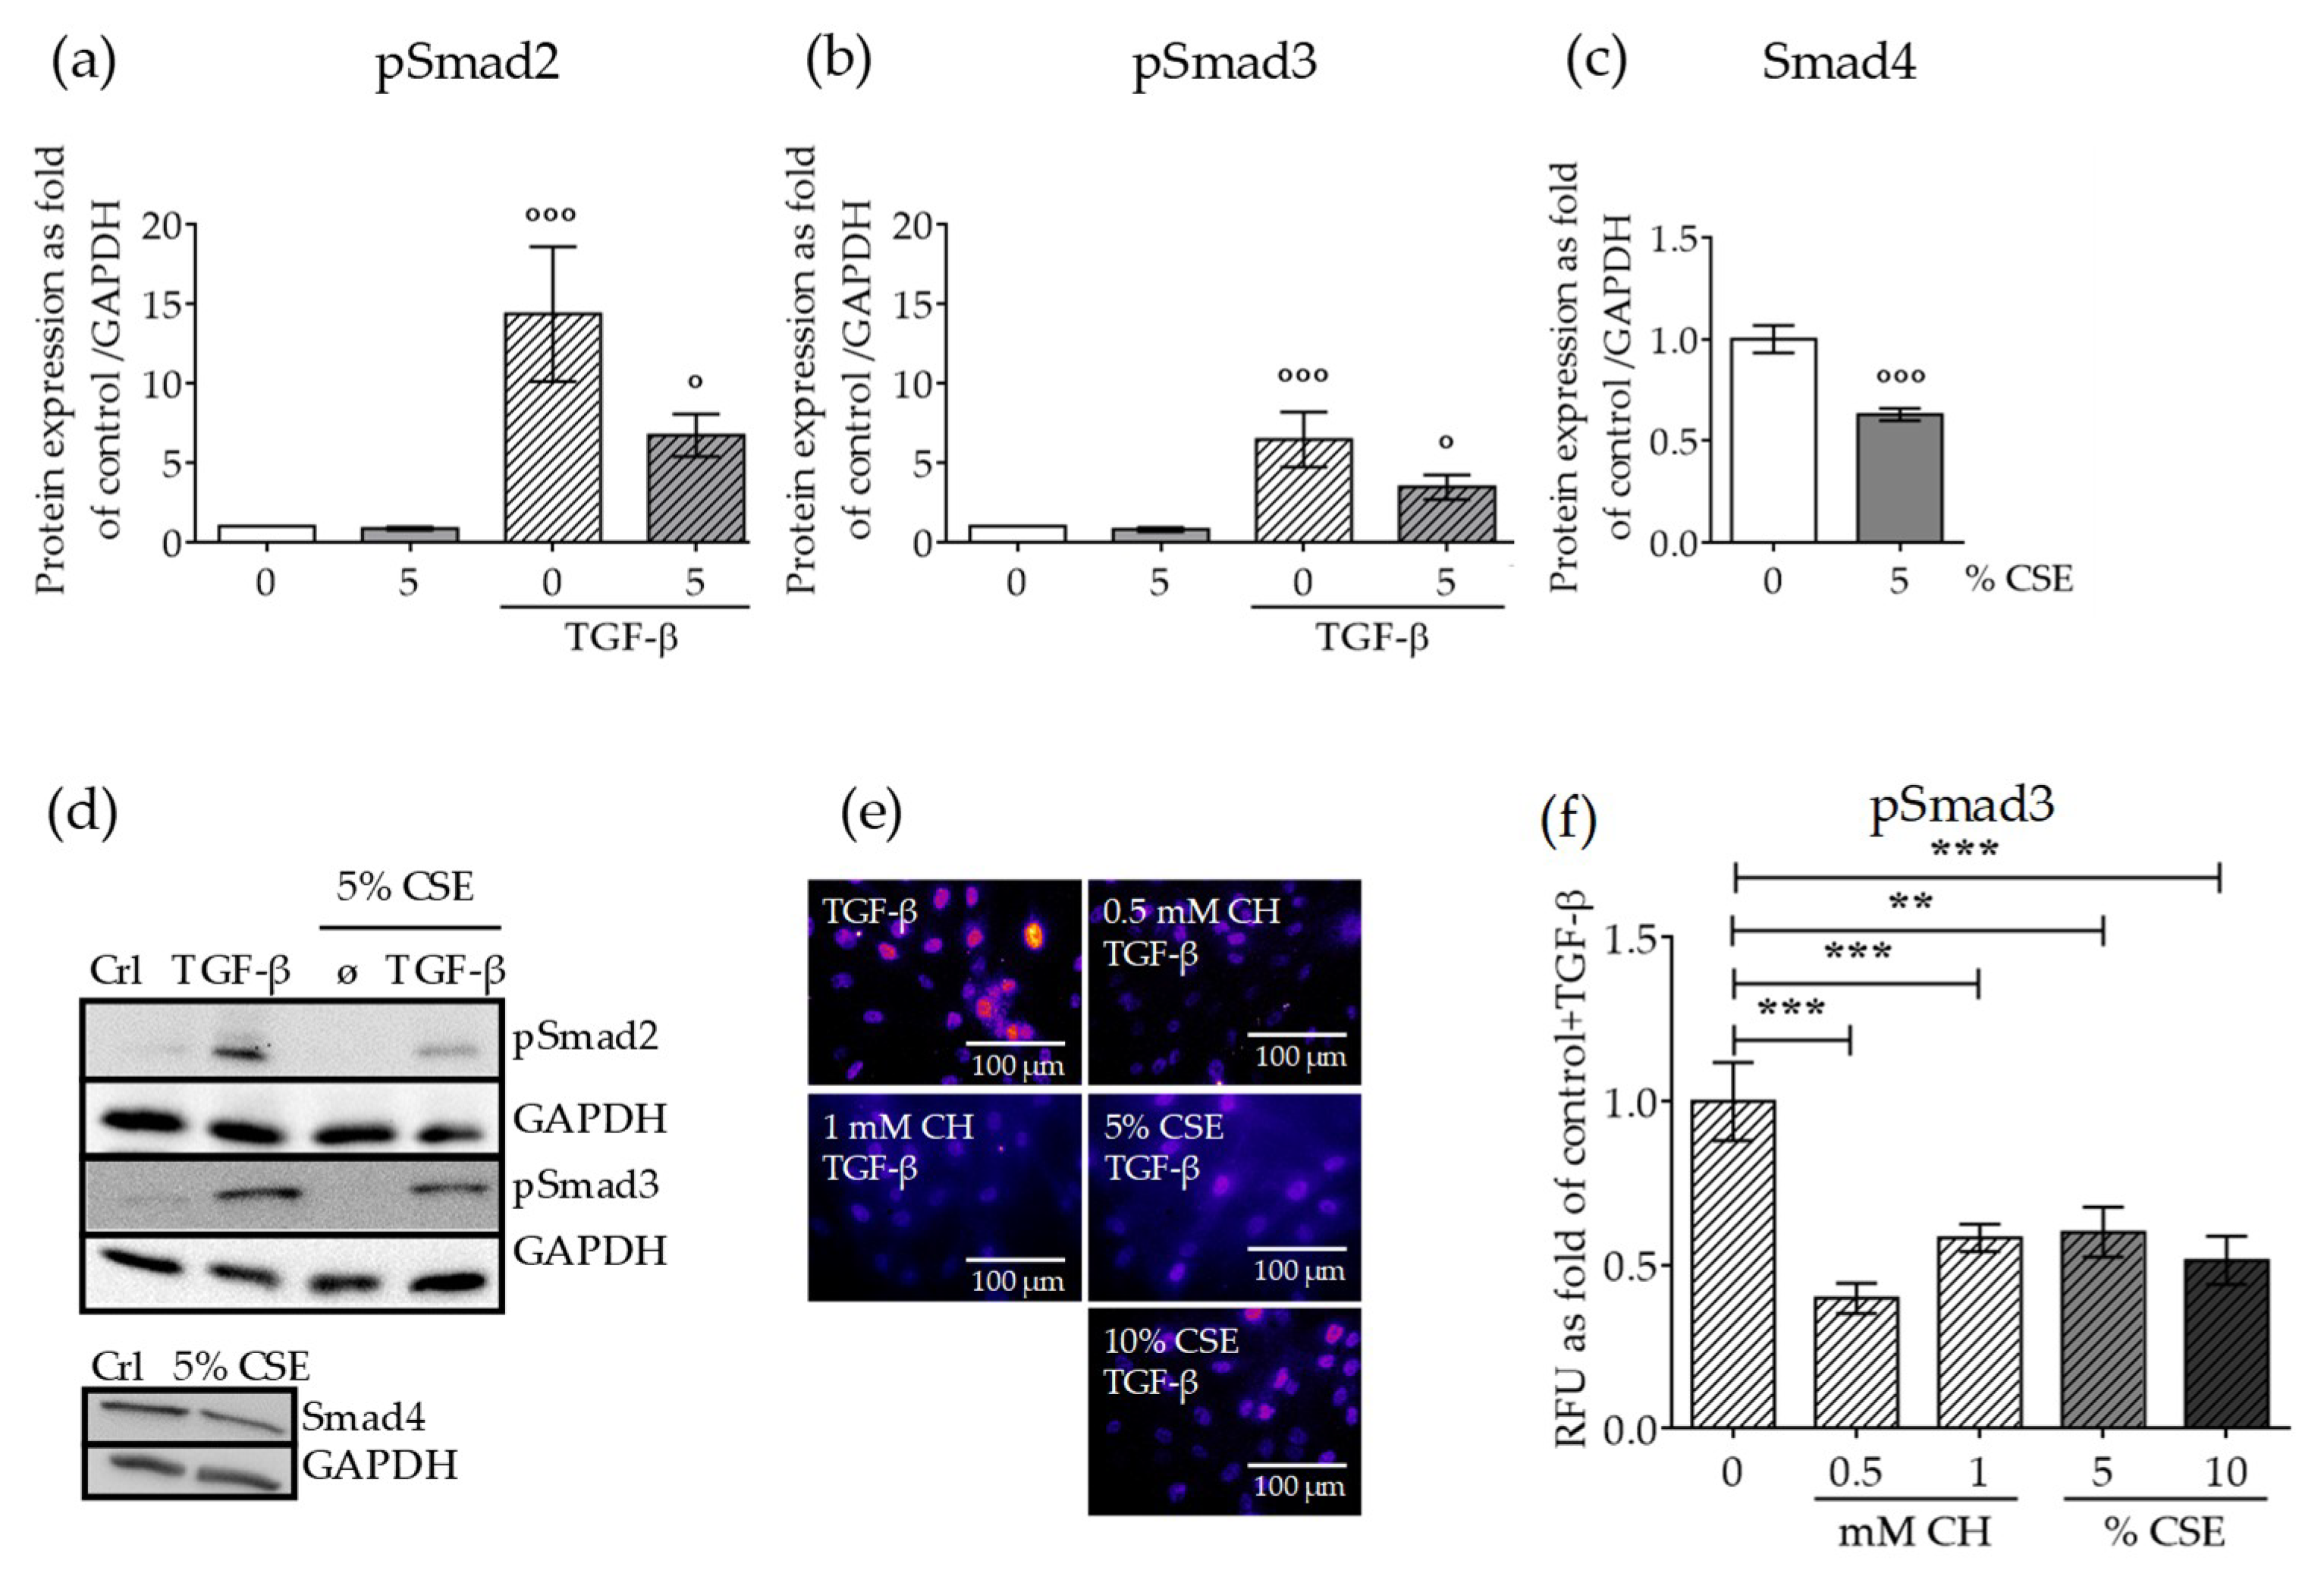 Ijms Free Full Text Cigarette Smoke Induces The Risk Of Metabolic Bone Diseases Transforming Growth Factor Beta Signaling Impairment Via Dysfunctional Primary Cilia Affects Migration Proliferation And Differentiation Of Human Mesenchymal